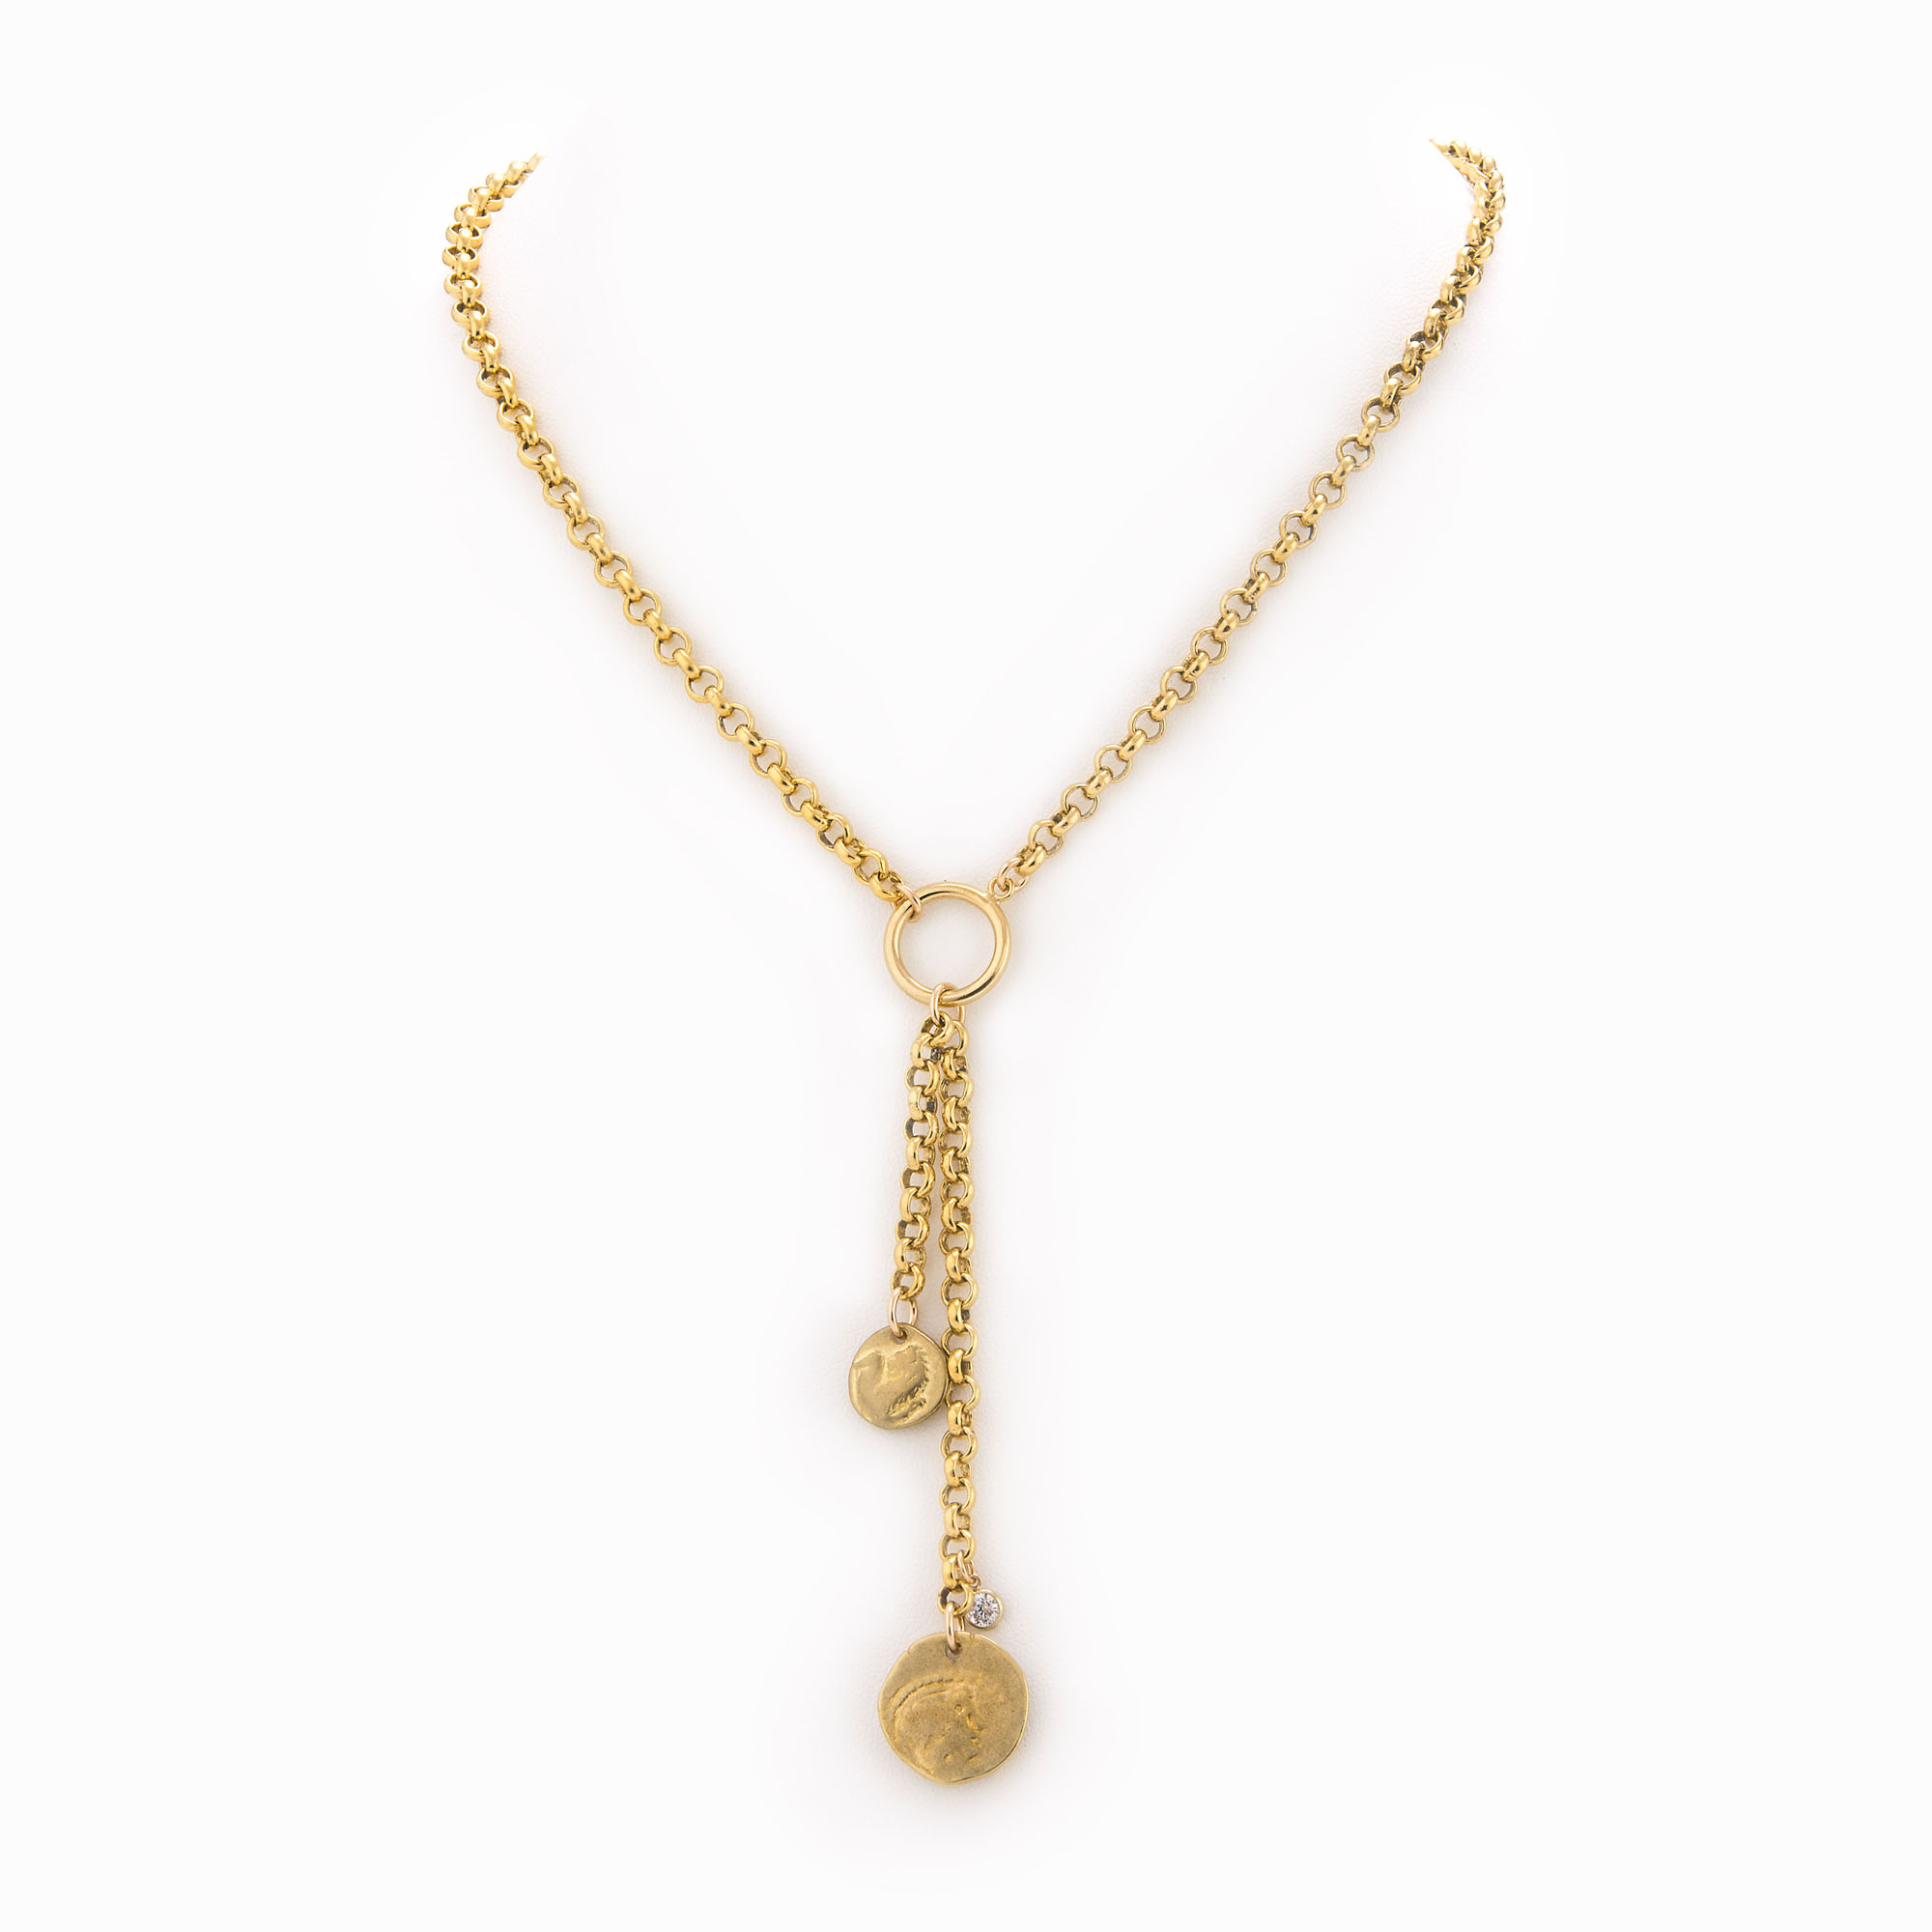 Featured image for “Indie Brass Rolo Chain Necklace”